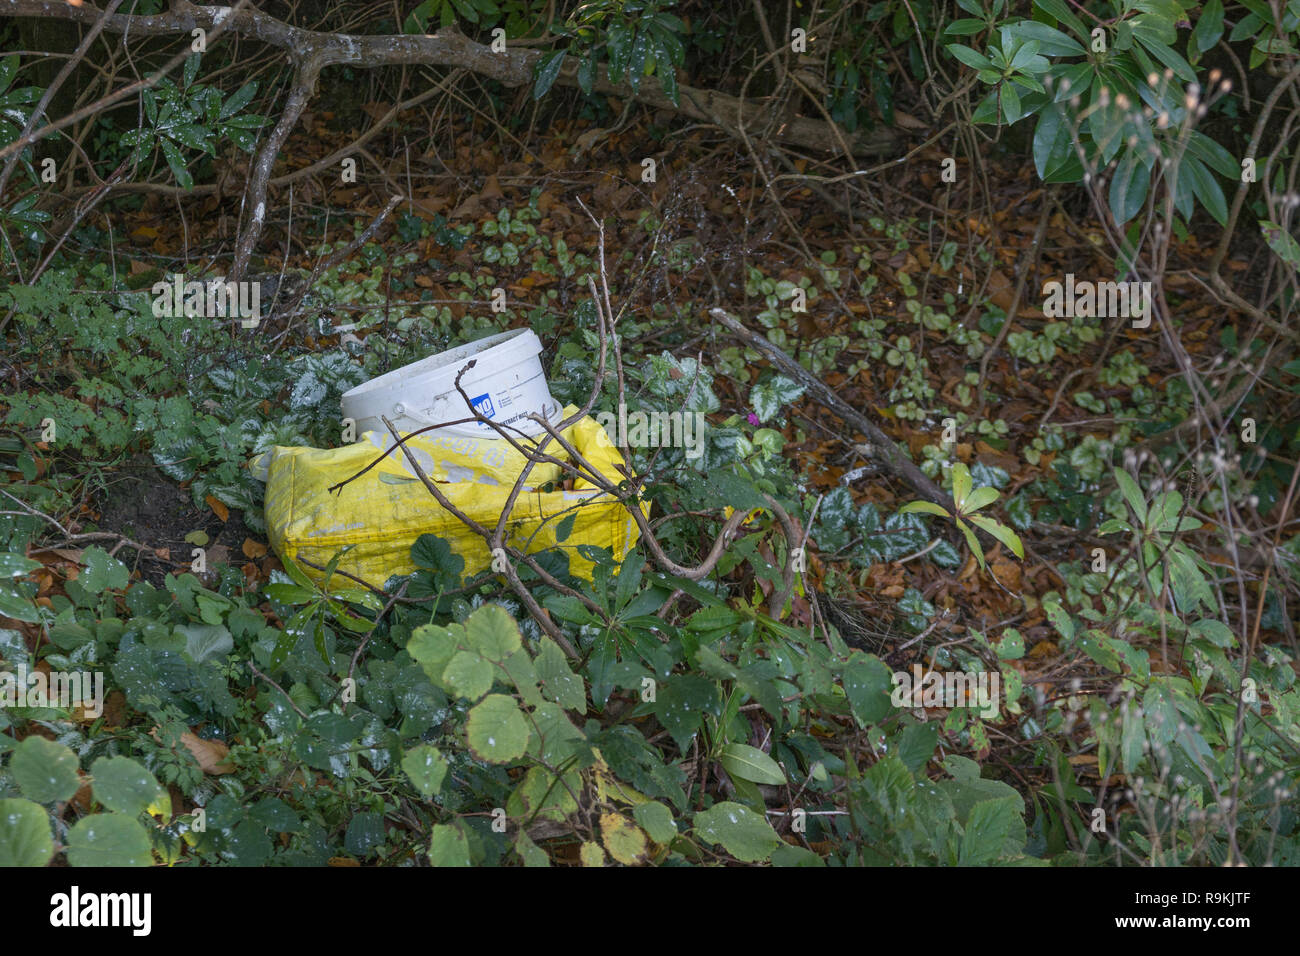 Plastic decorating gear discarded in rural hedgerow. Metaphor on war on plastic, plastic pollution, plastic rubbish, Clean Up Britain campaign. Stock Photo